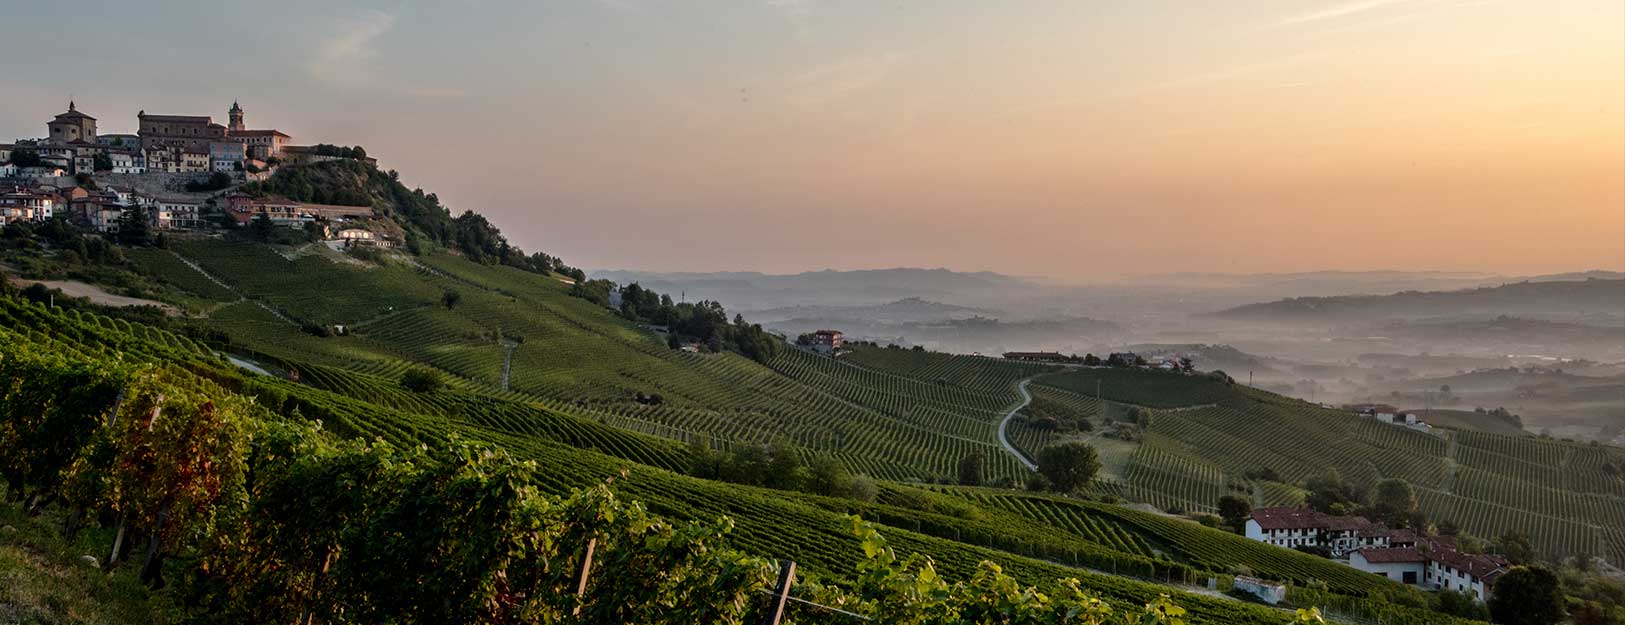 Postcard from Langhe